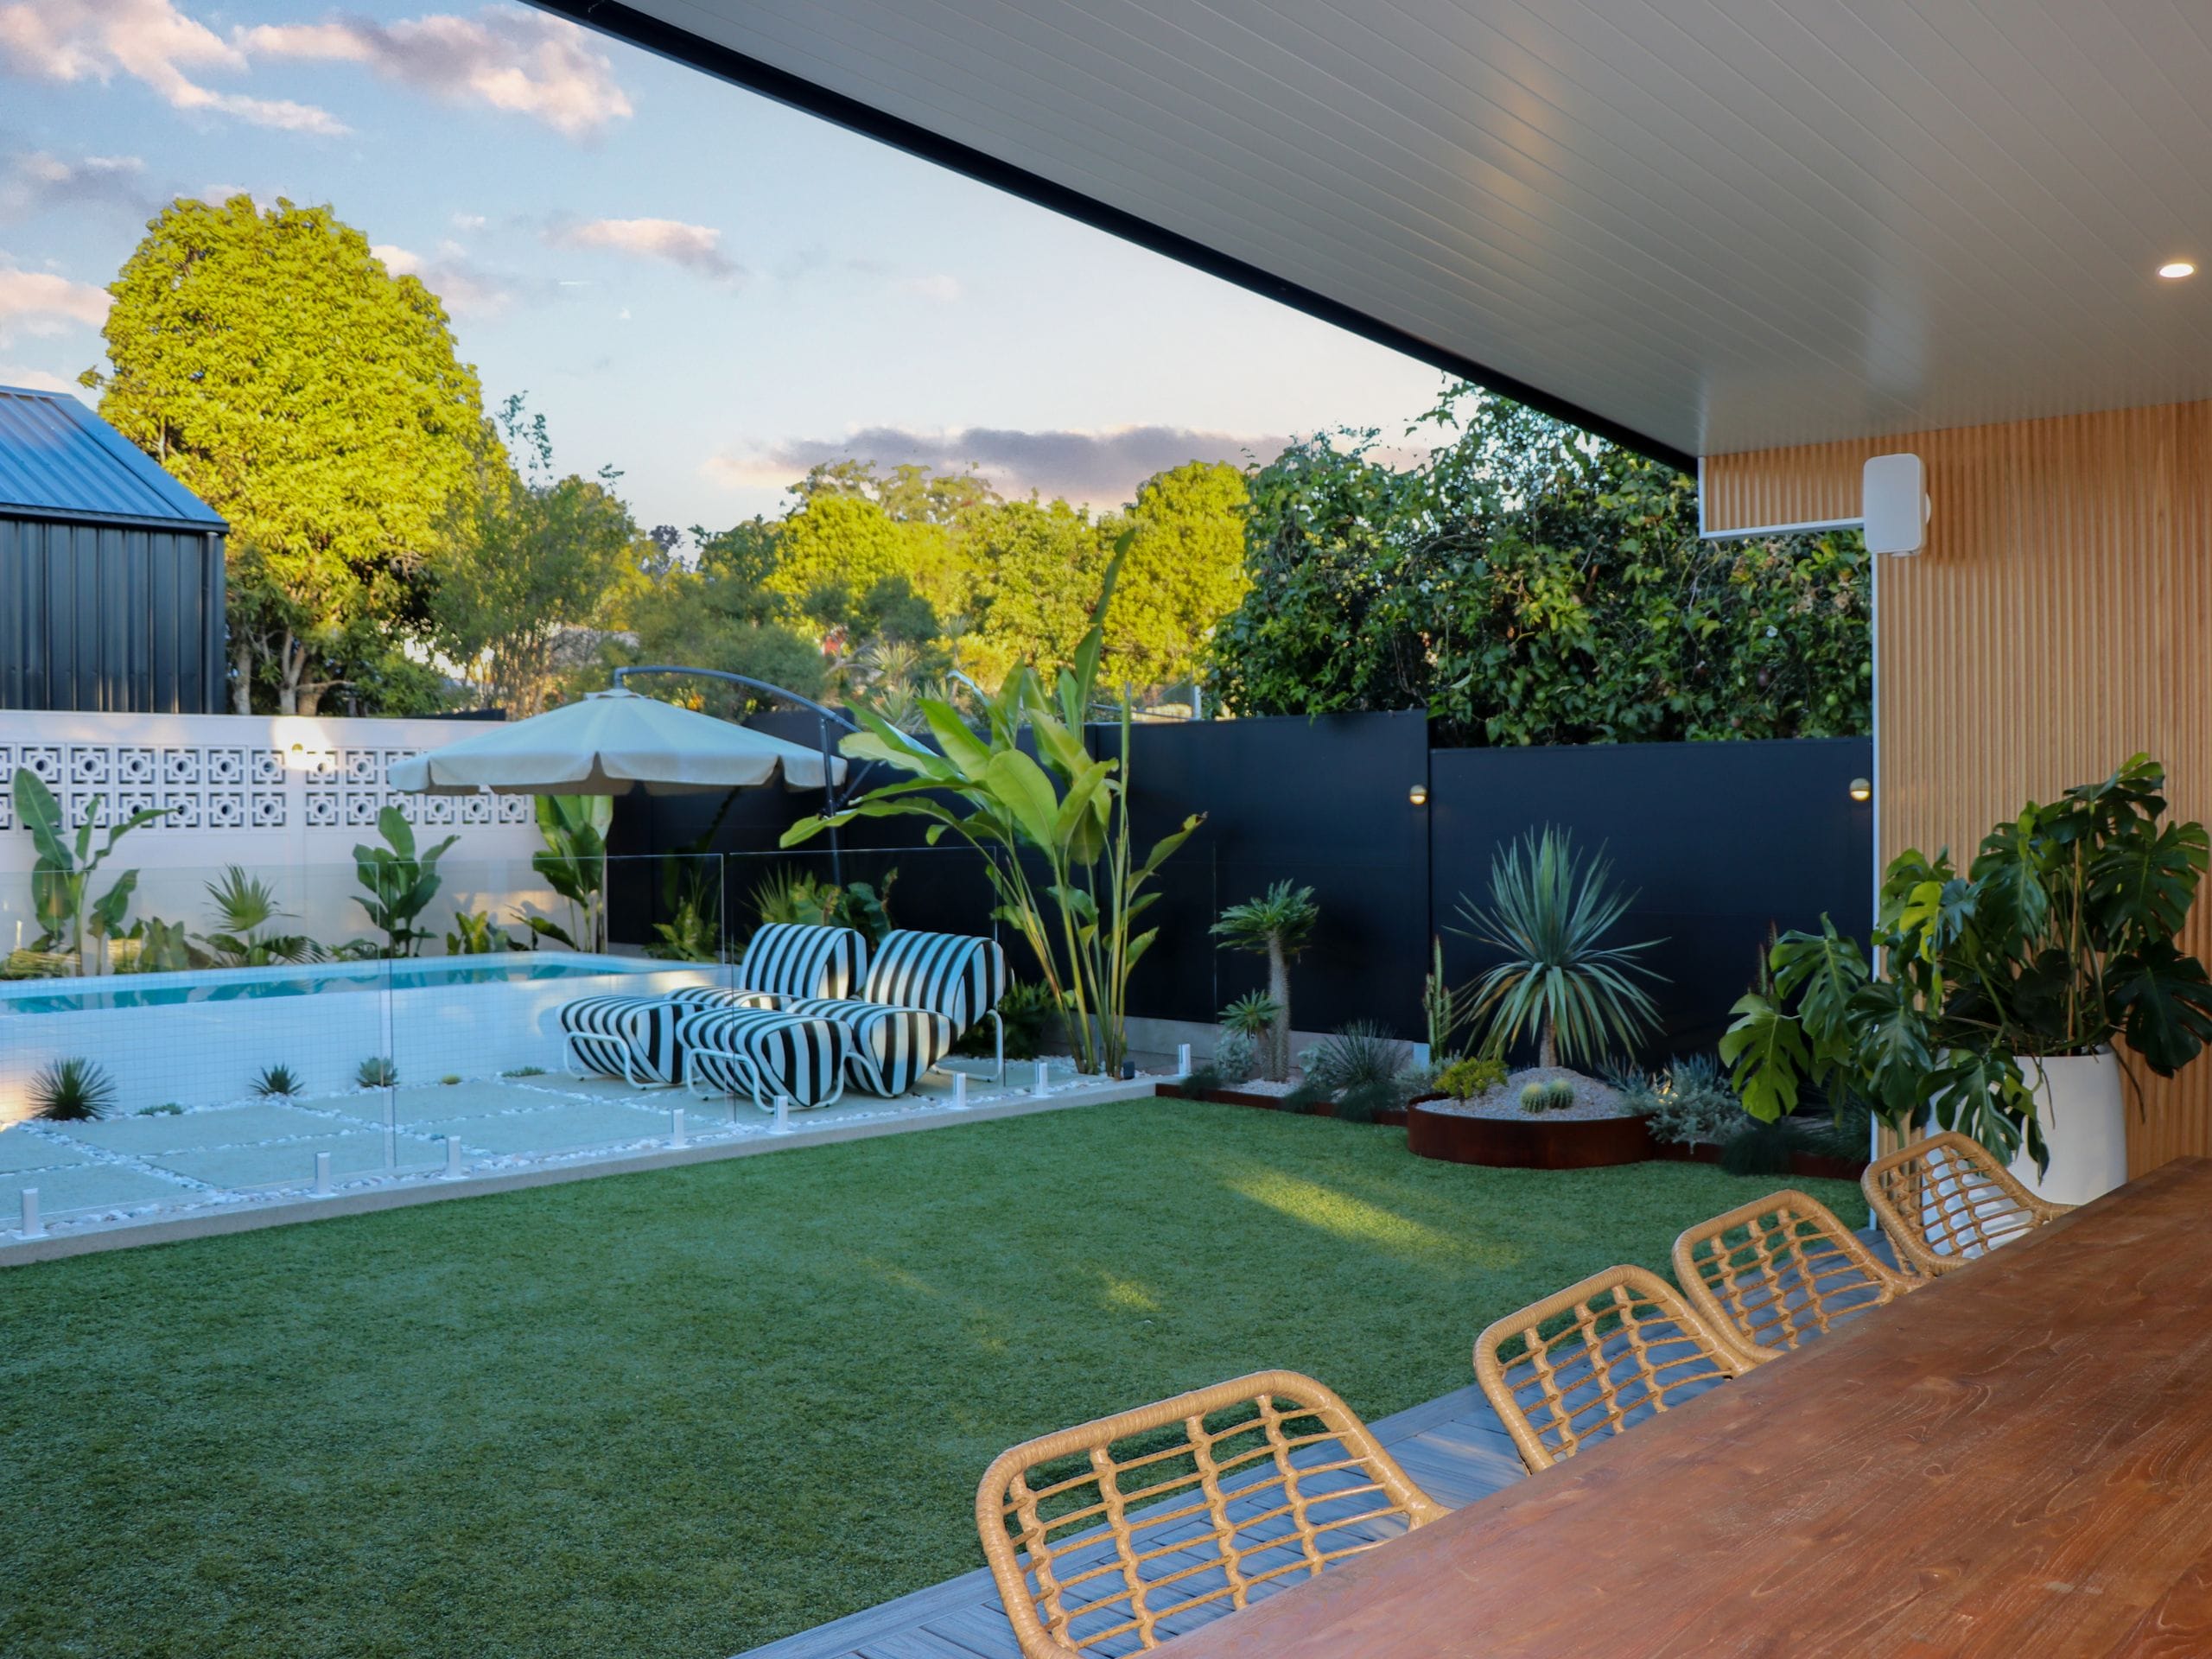 Jimmy & Tam's backyard includes a pool, lawn and outdoor kitchen and dining.